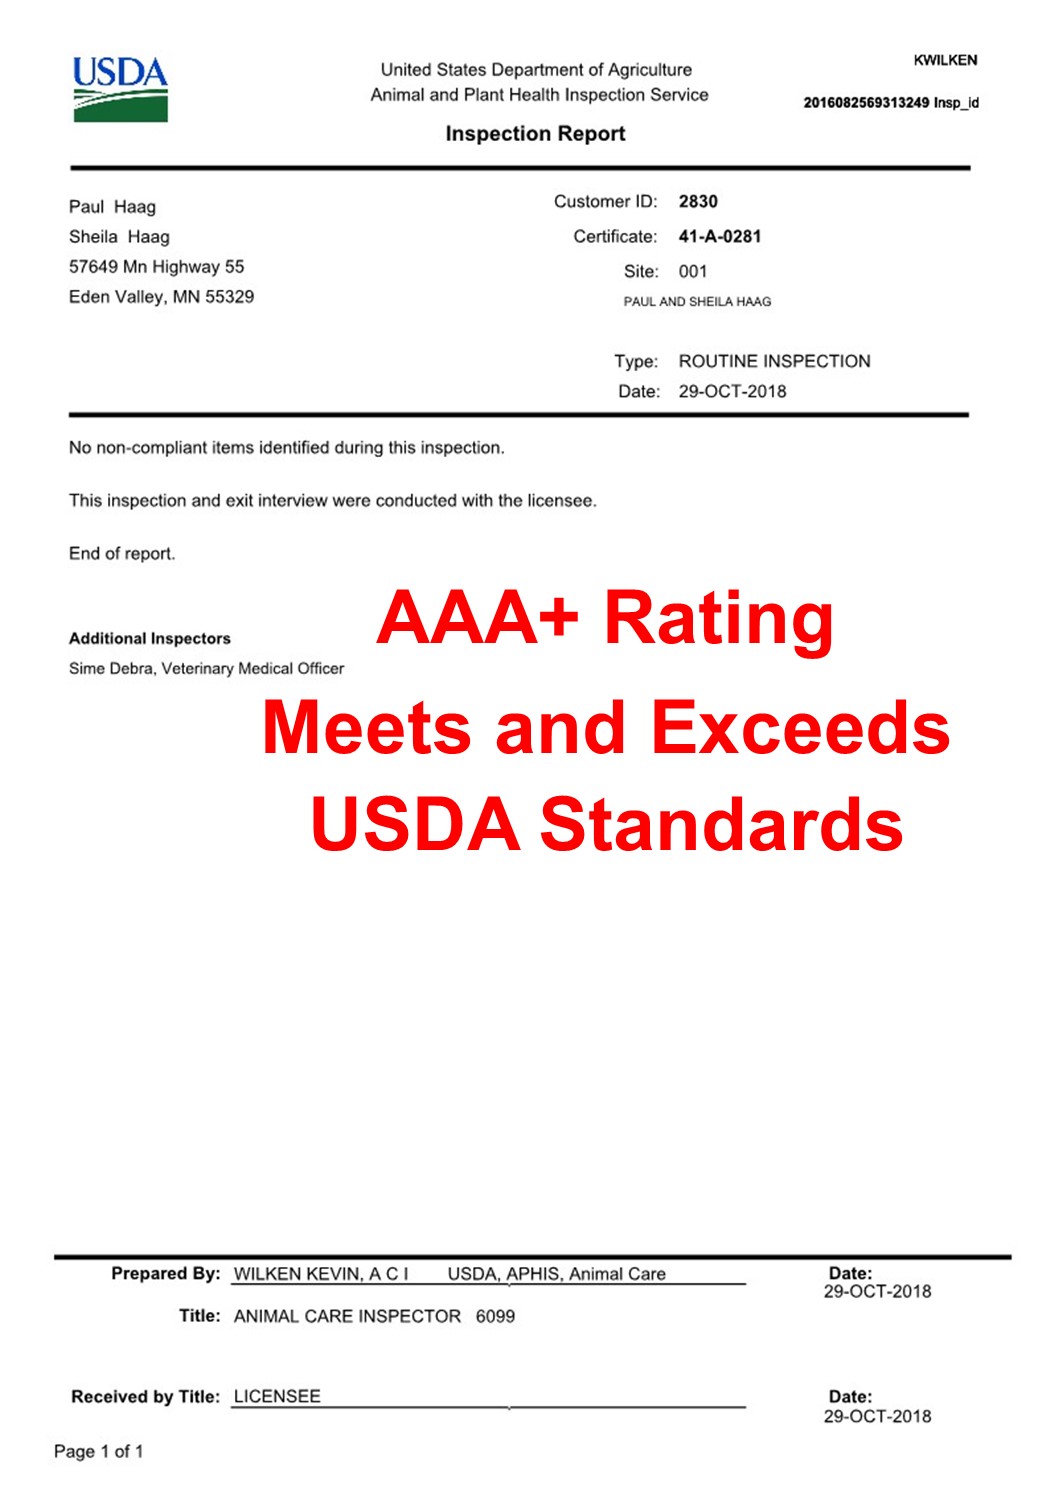 AAA+ MEETS AND EXCEEDS USDA INSPECTION REQUIREMENTS - KYLE HAAG PROFESSIONAL DOG BREEDER